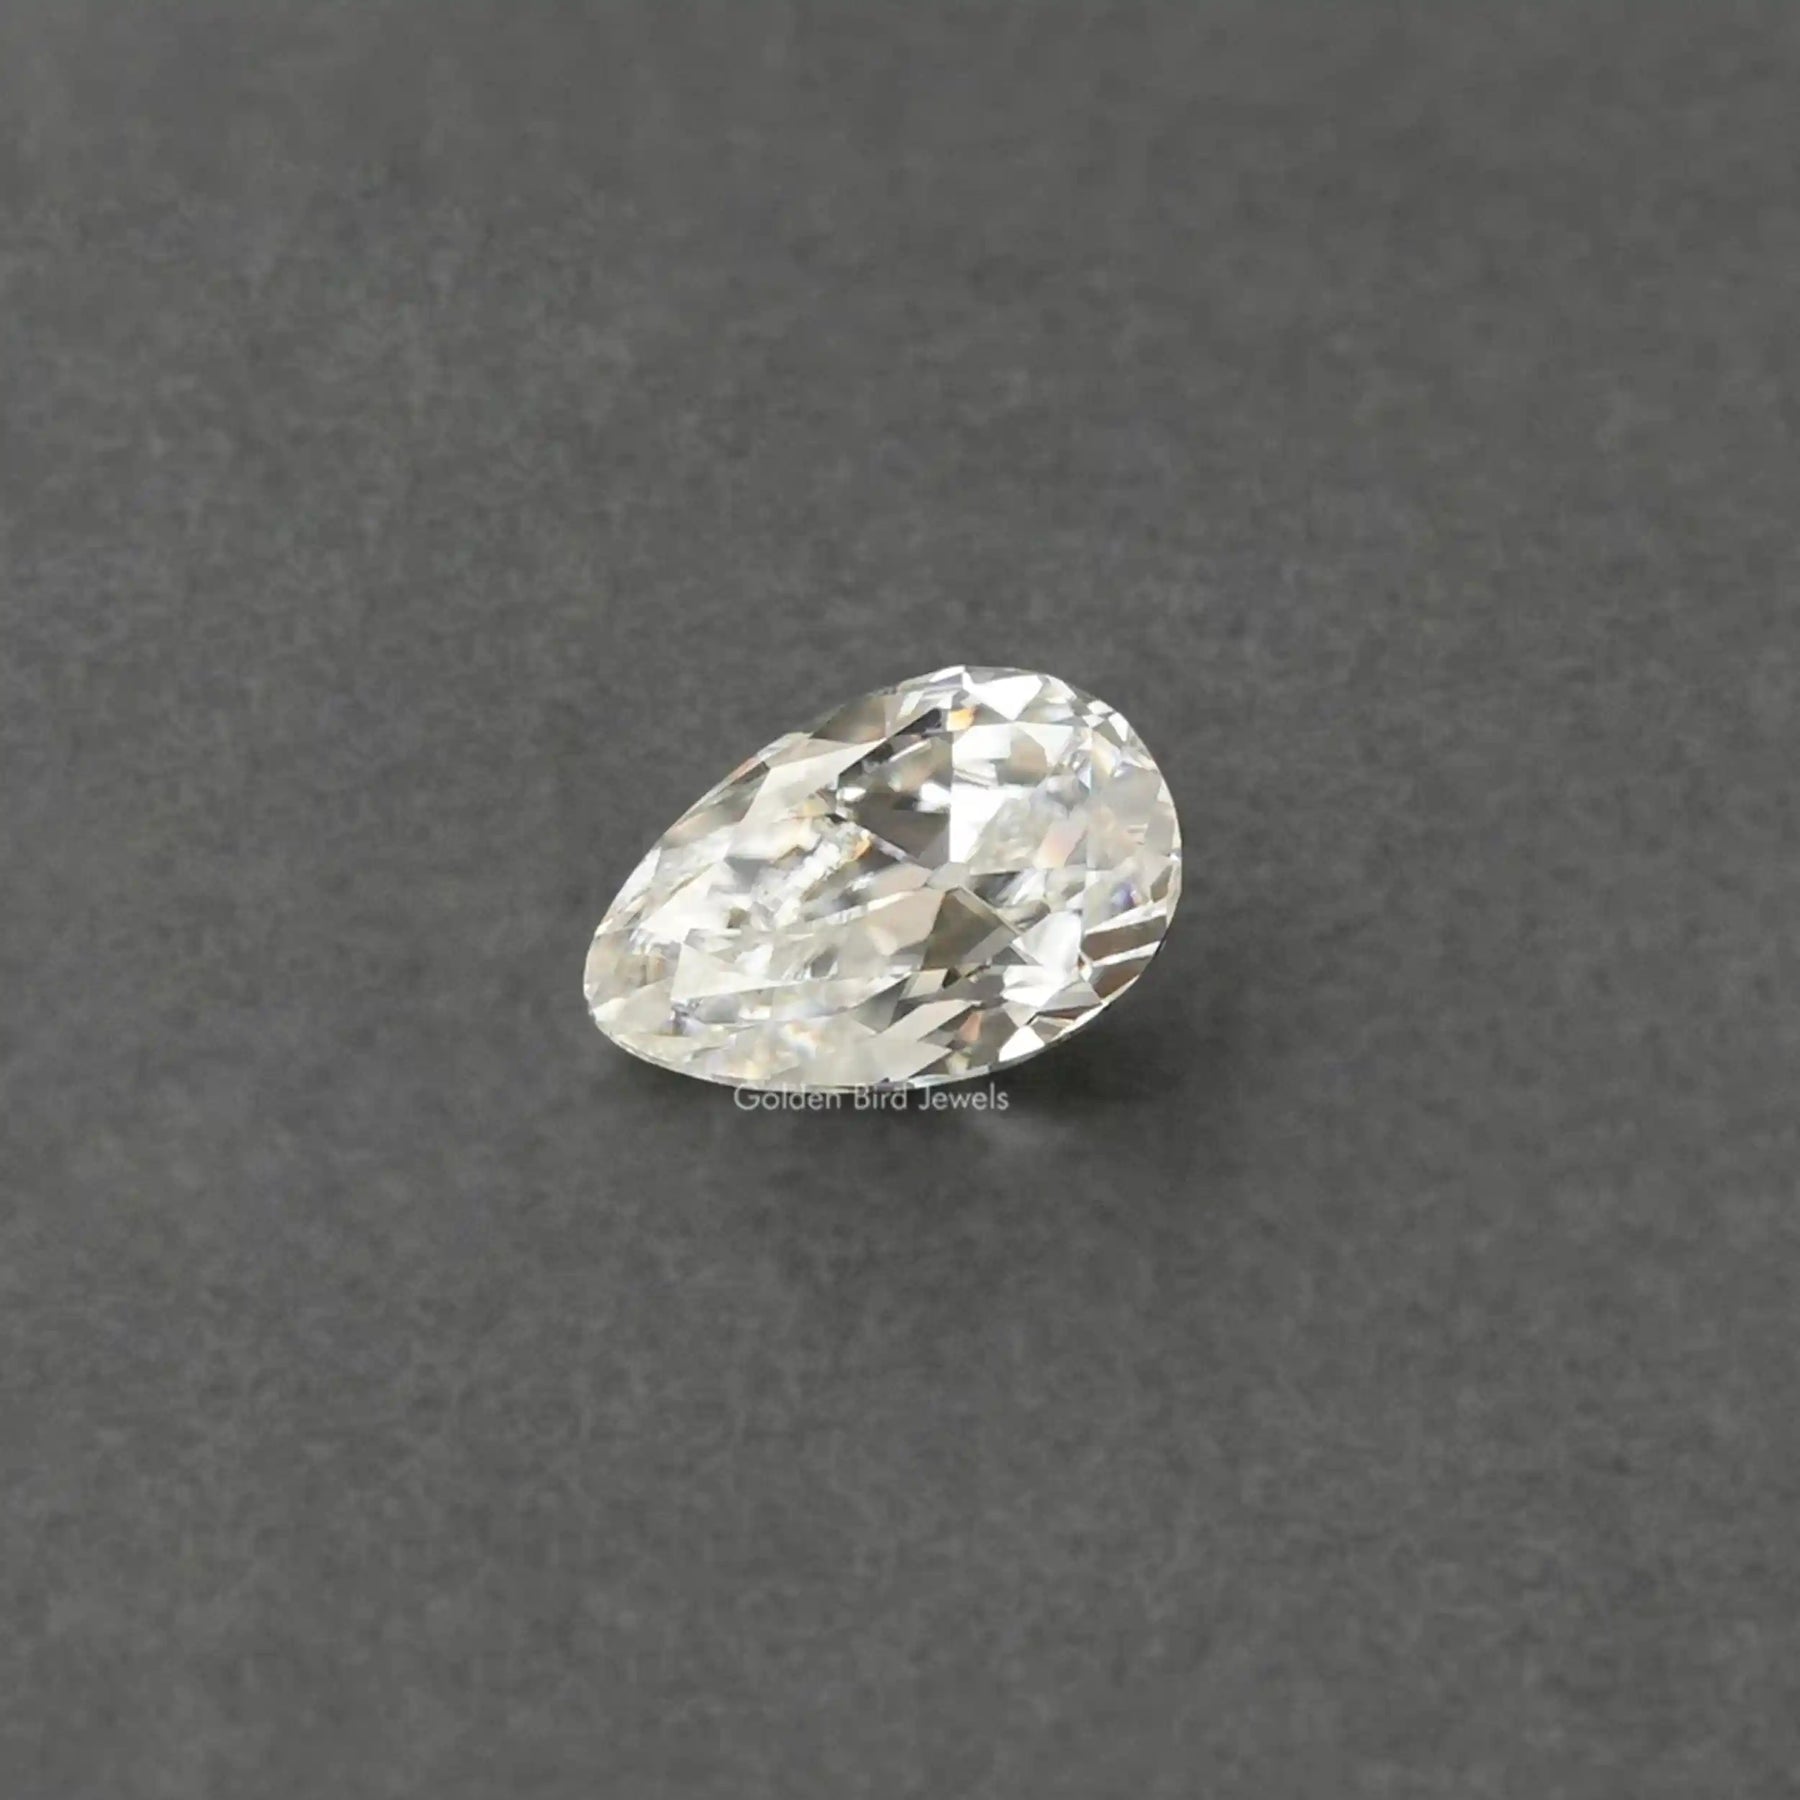 [This old mine pear cut moissanite loose stone crafted with VVS clarity]-[Golden Bird Jewels]